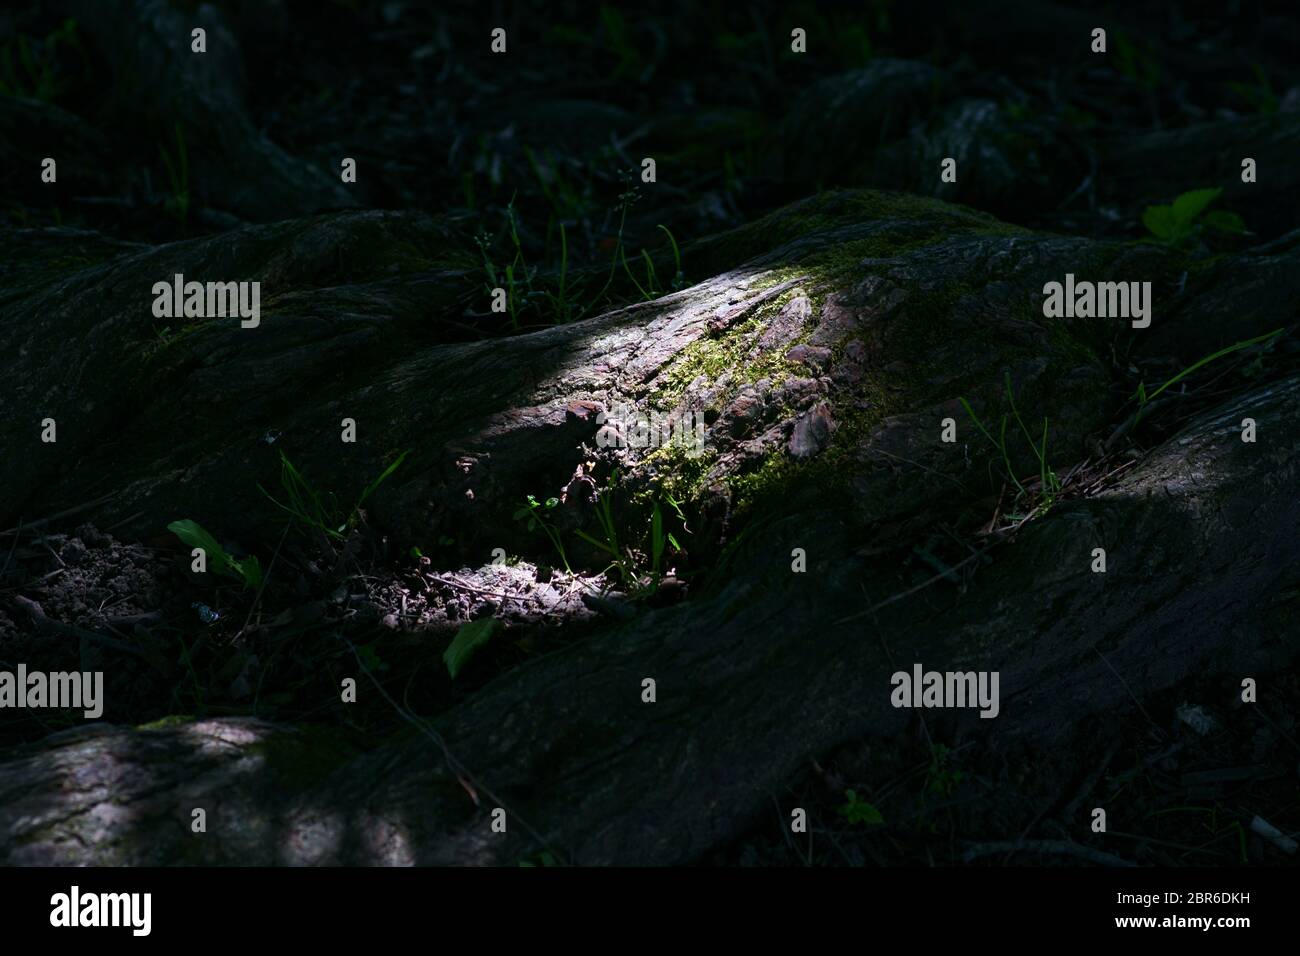 The root of a tree in the undergrowth in the shadow of its branches and branches. Stock Photo